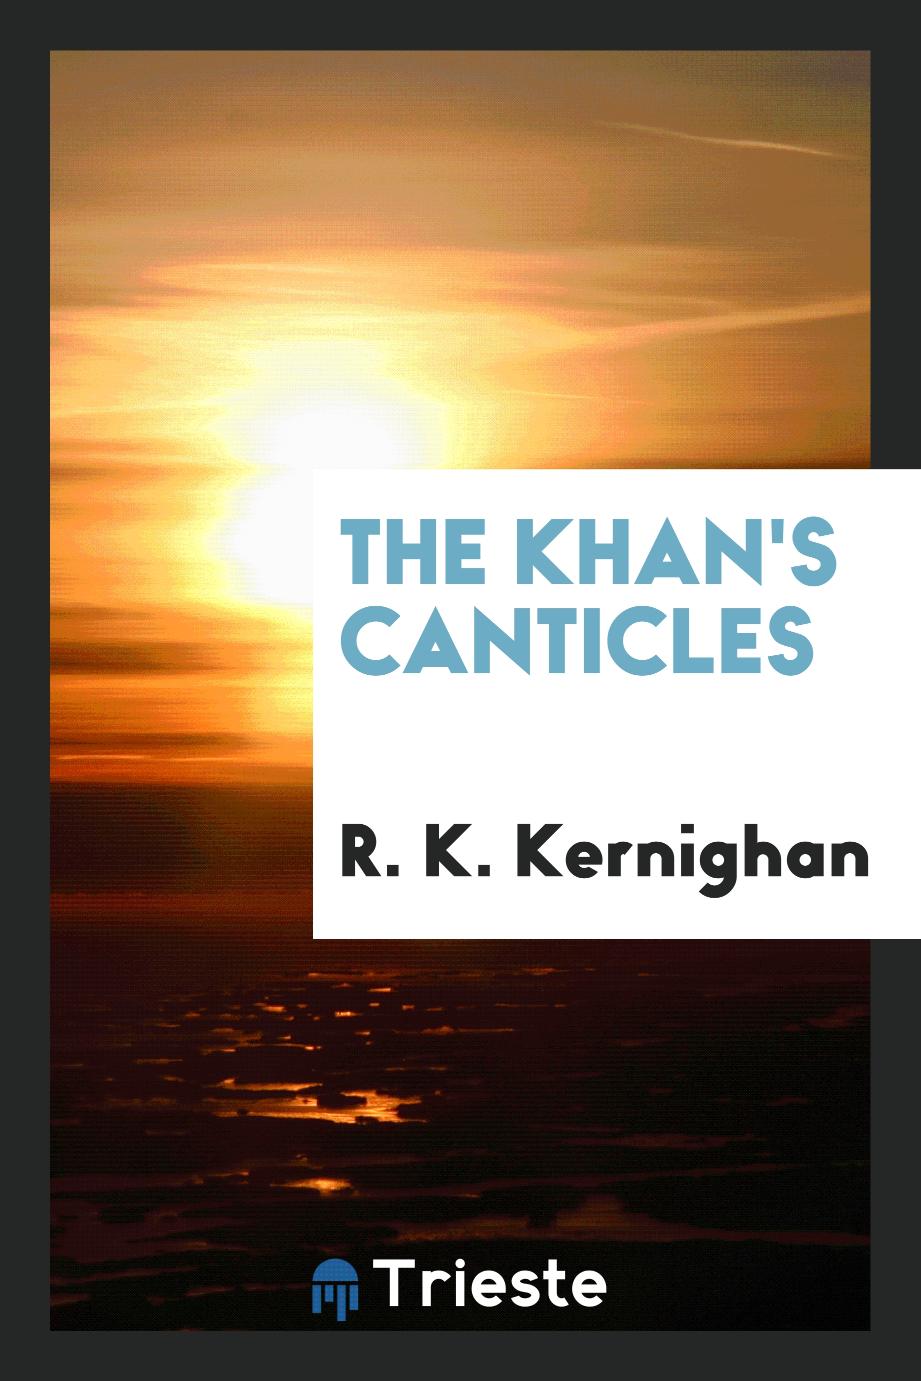 The Khan's canticles